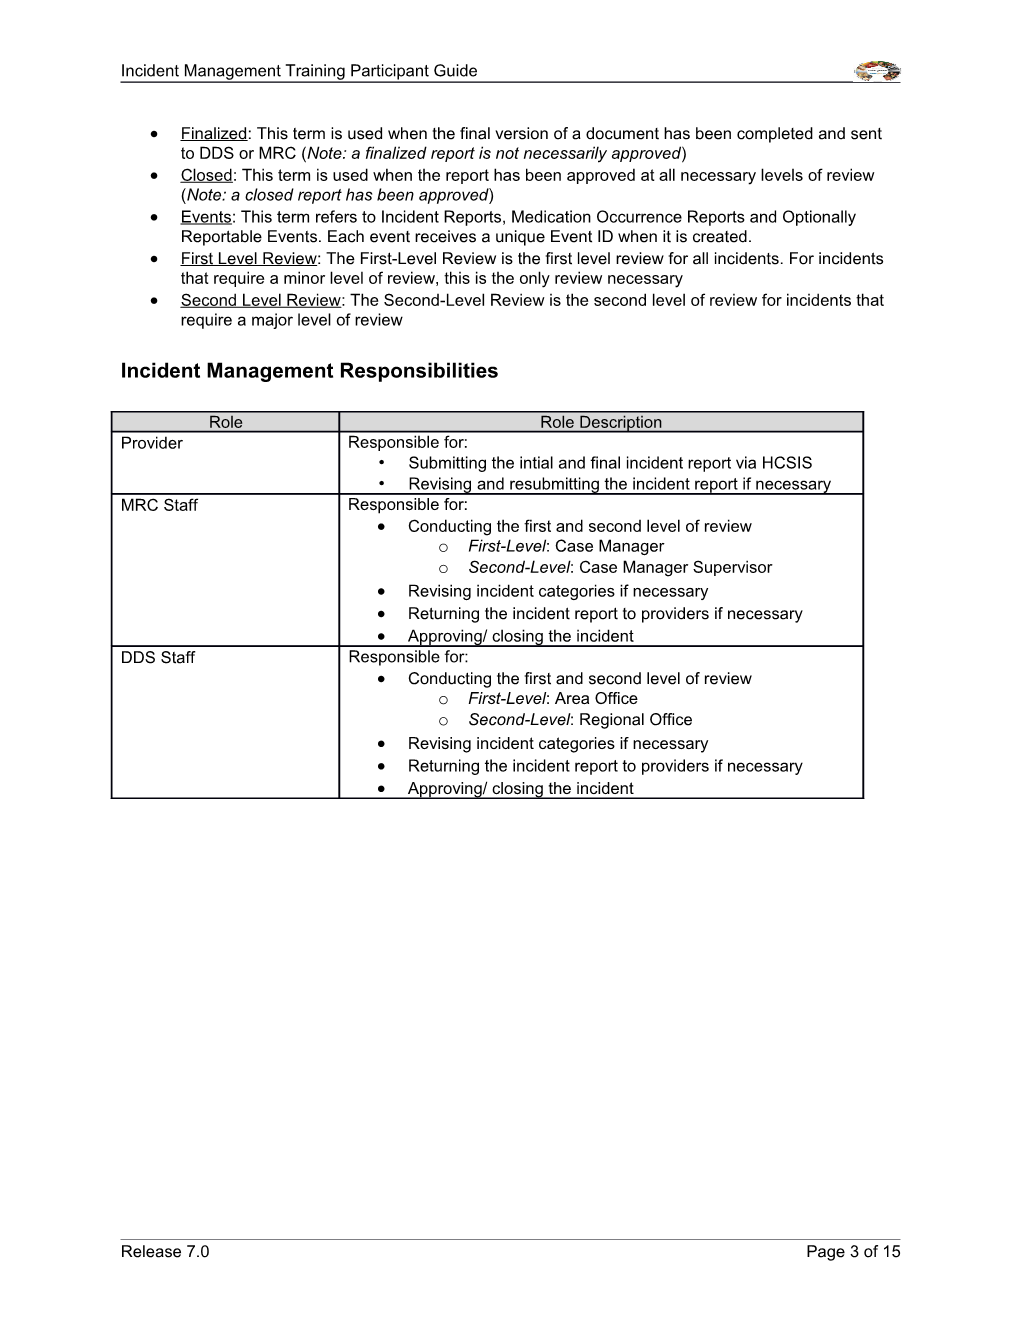 Incident Management Module Overview